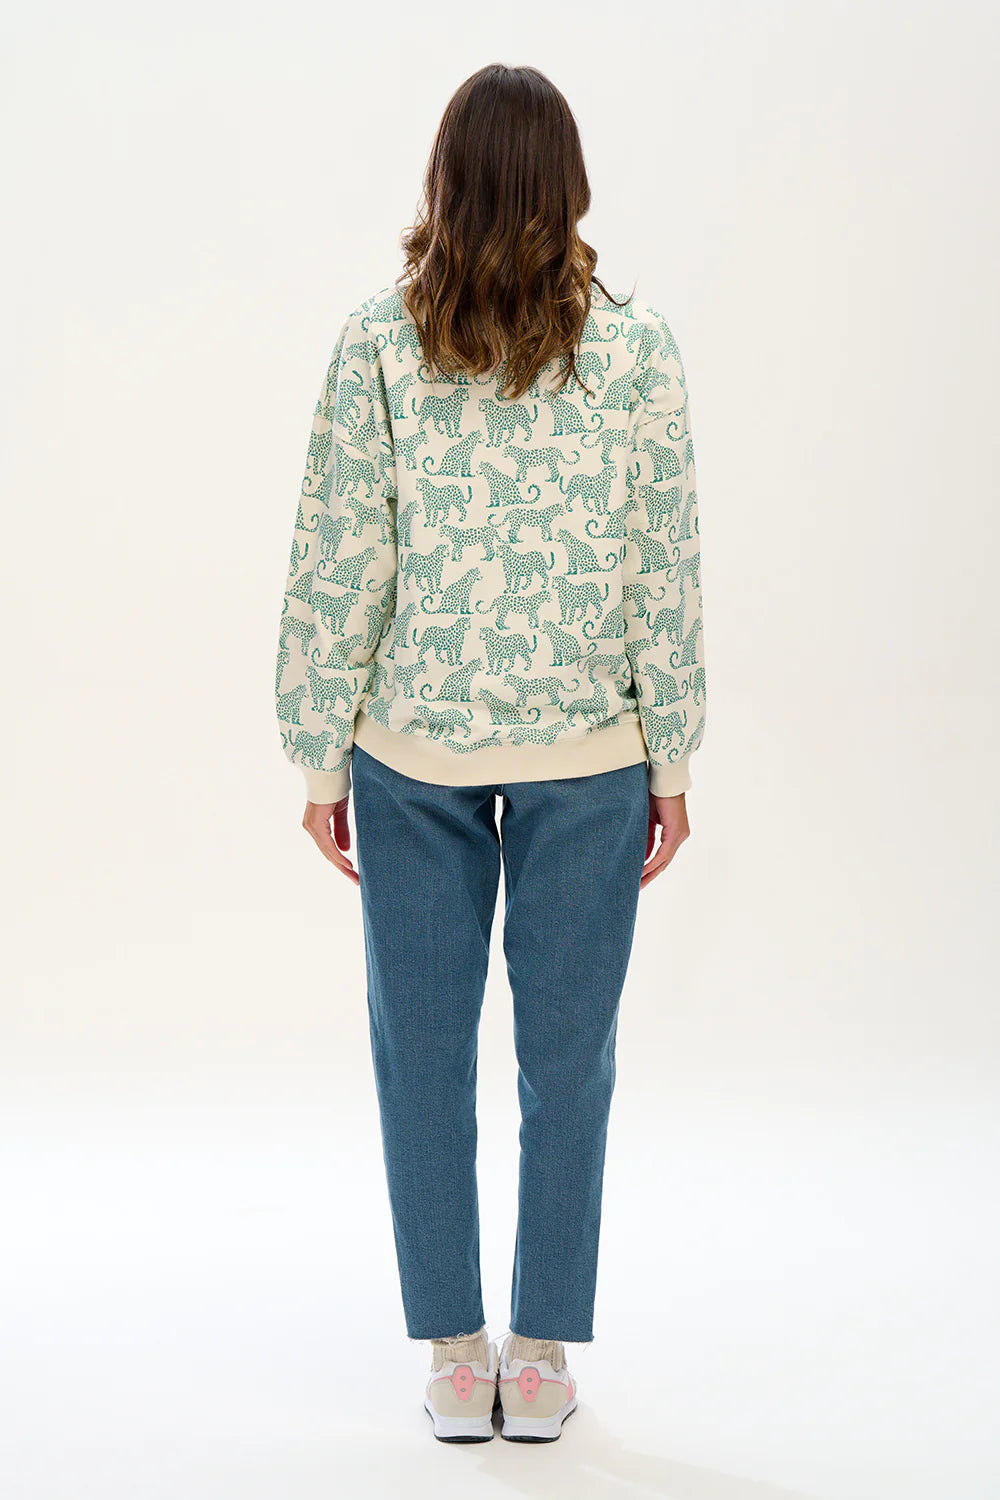 Eadie Relaxed Sweatshirt - Off-White, Green Leopards